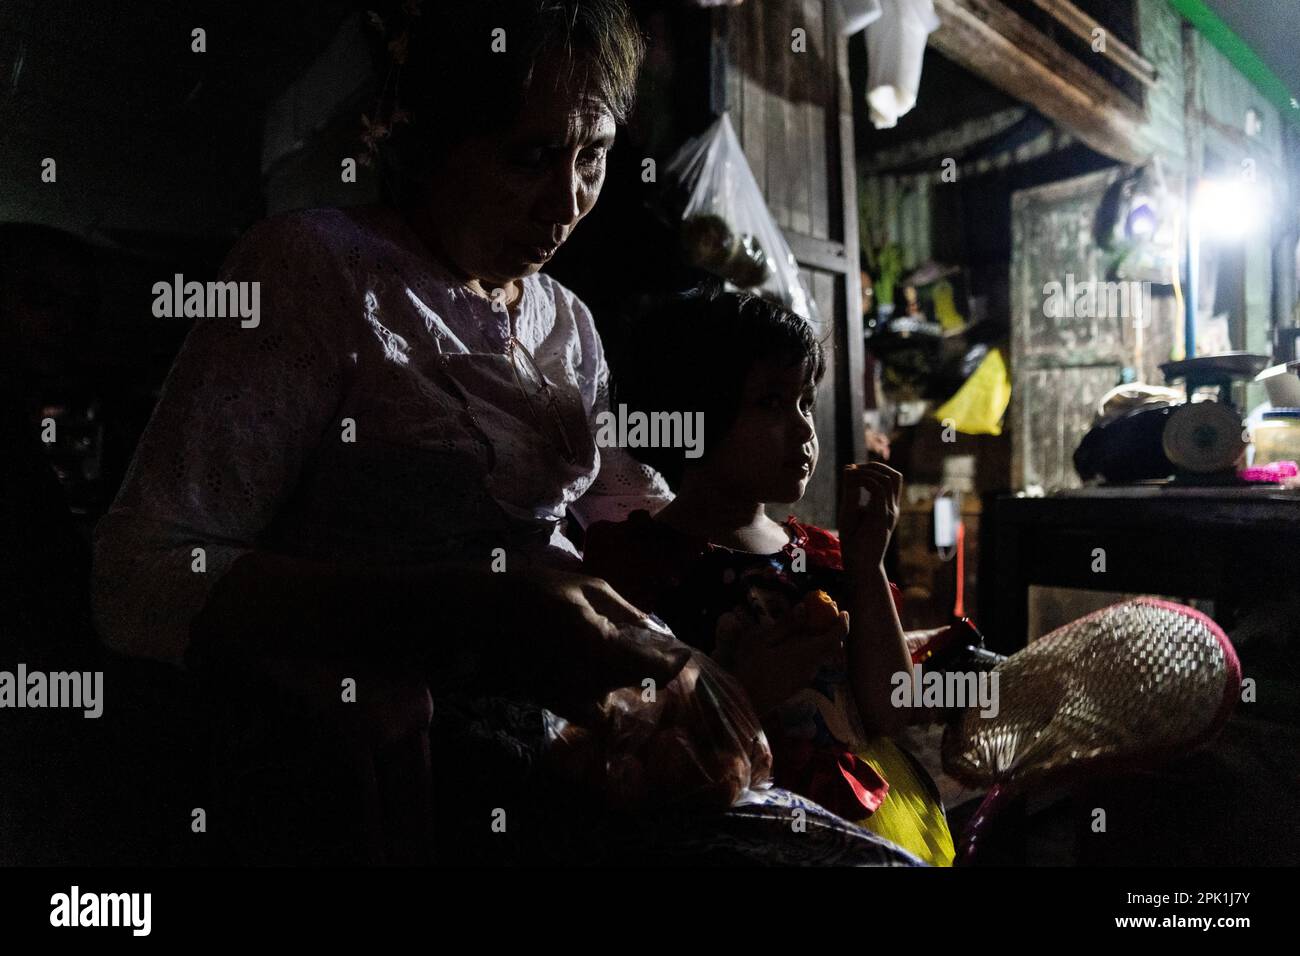 A young girl eats with her mother during a blackout at a shop on the street in Yangon. Due to soaring costs and the lack of hydropower during the dry season, the military junta (Tatmadaw) rations electricity throughout Yangon daily, leaving large sections of the city (townships) completely blacked out everyday. Daily life during the deadly civil war in Myanmar. On February 1, 2021, the military junta government (Tatmadaw) seized power by coup, jailing the democratically-elected government and plunging the country into an ongoing humanitarian crisis. Stock Photo